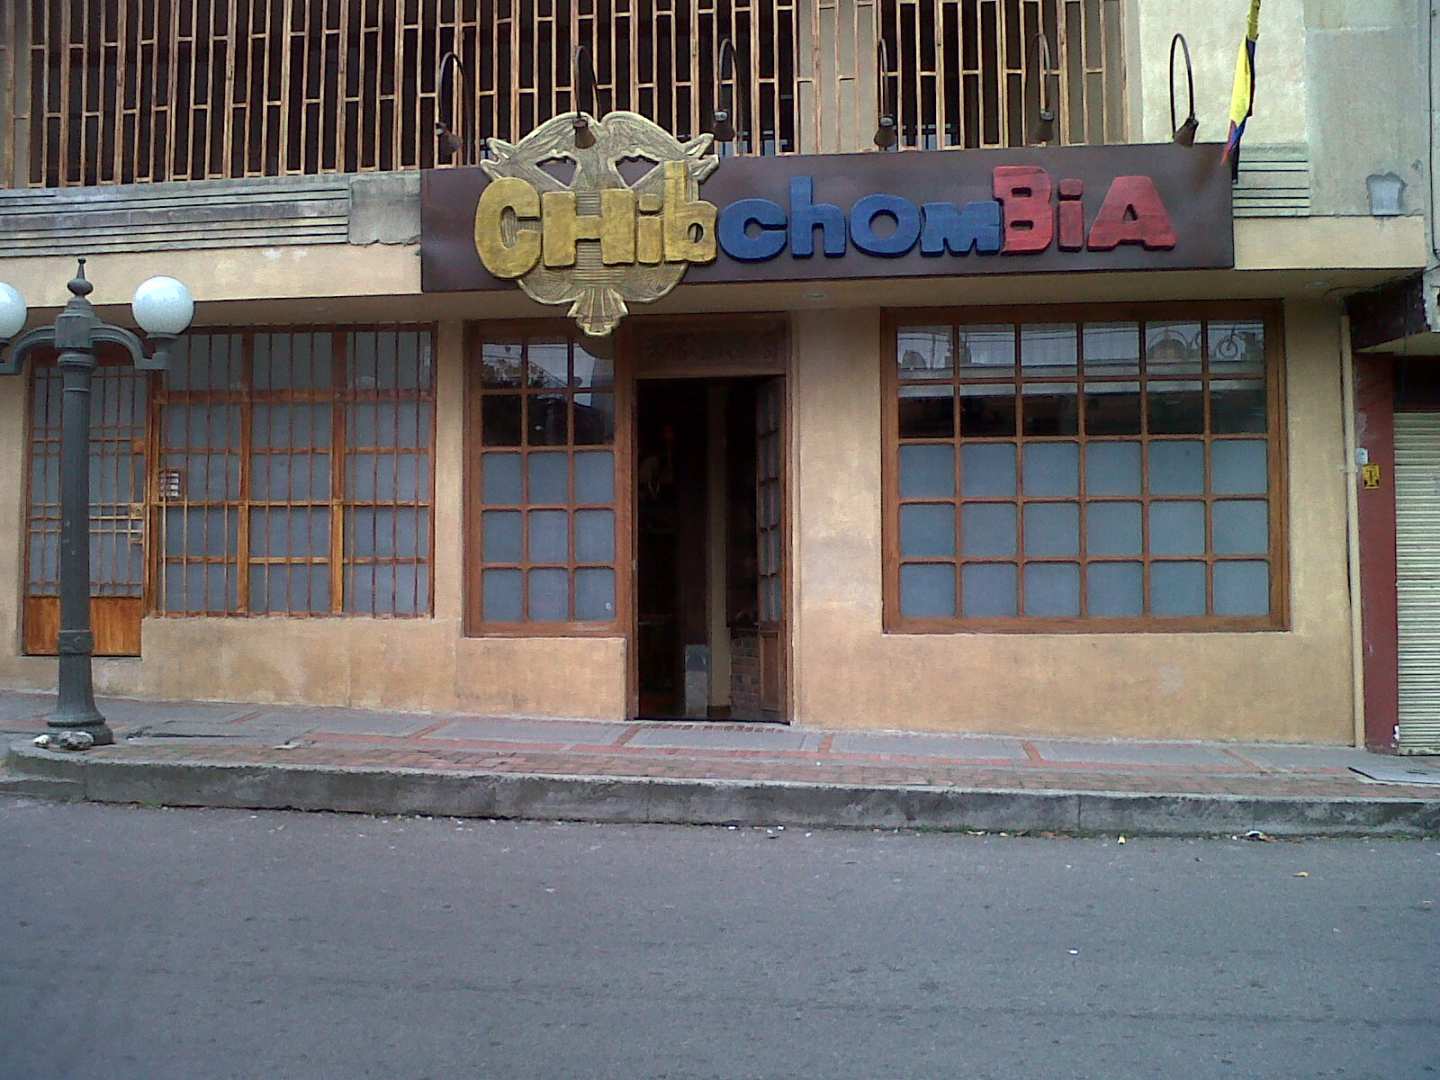 Chibchombia